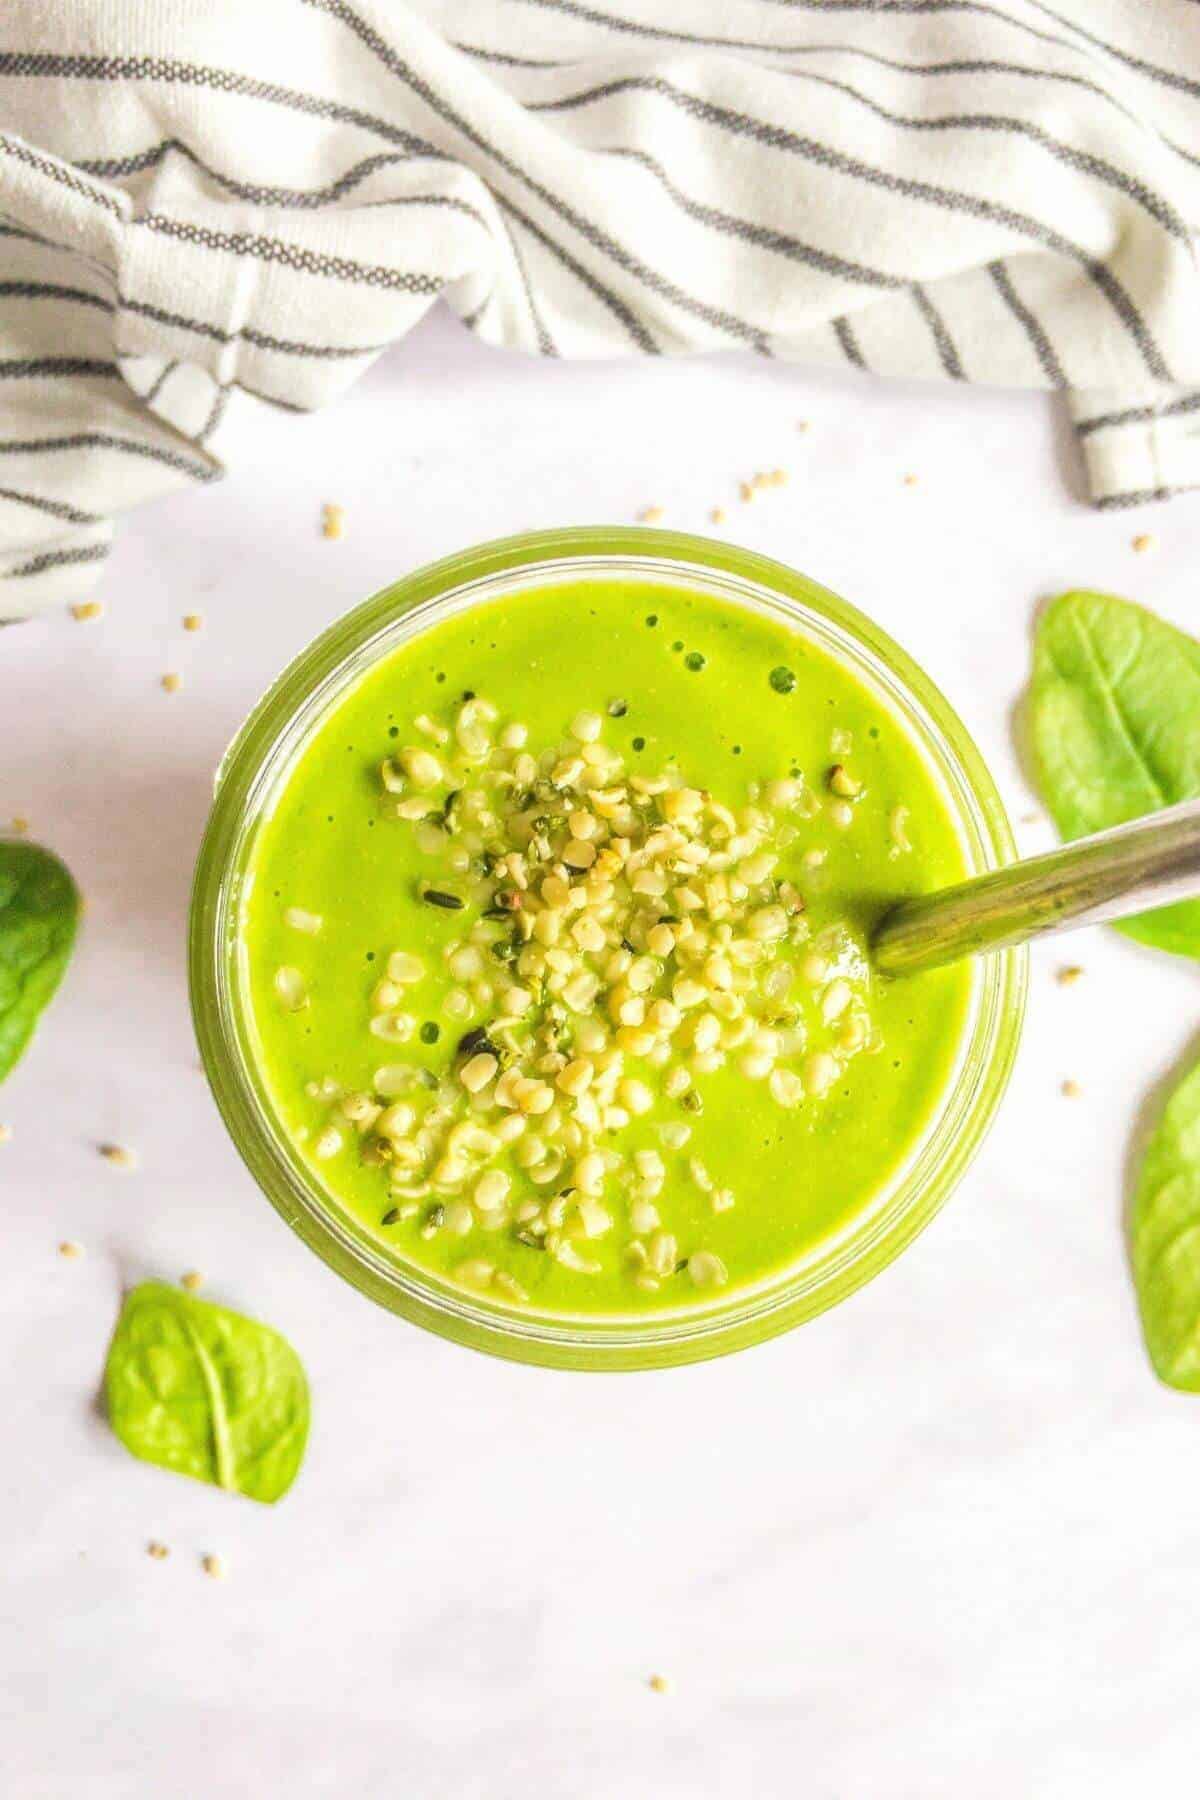 A bright green smoothie topped with hemp seeds and a straw.